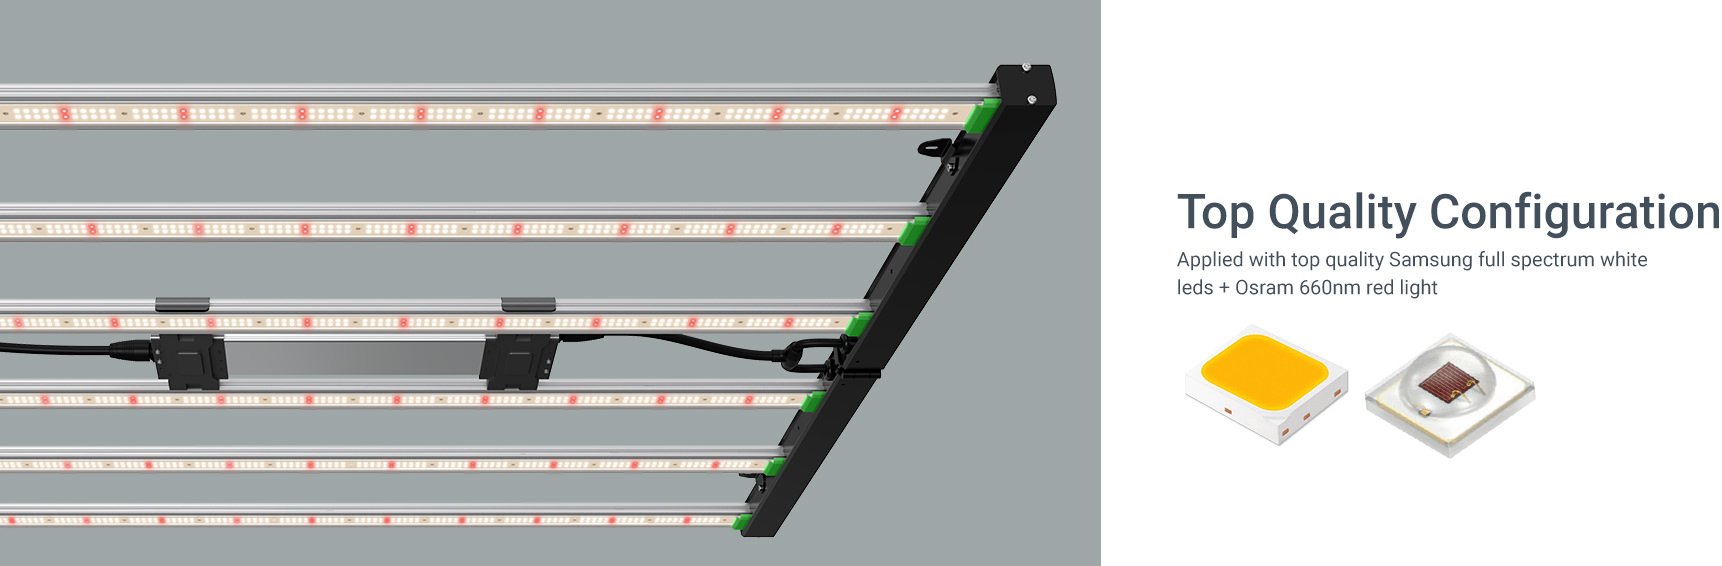 led grow light with samsung and osram red light